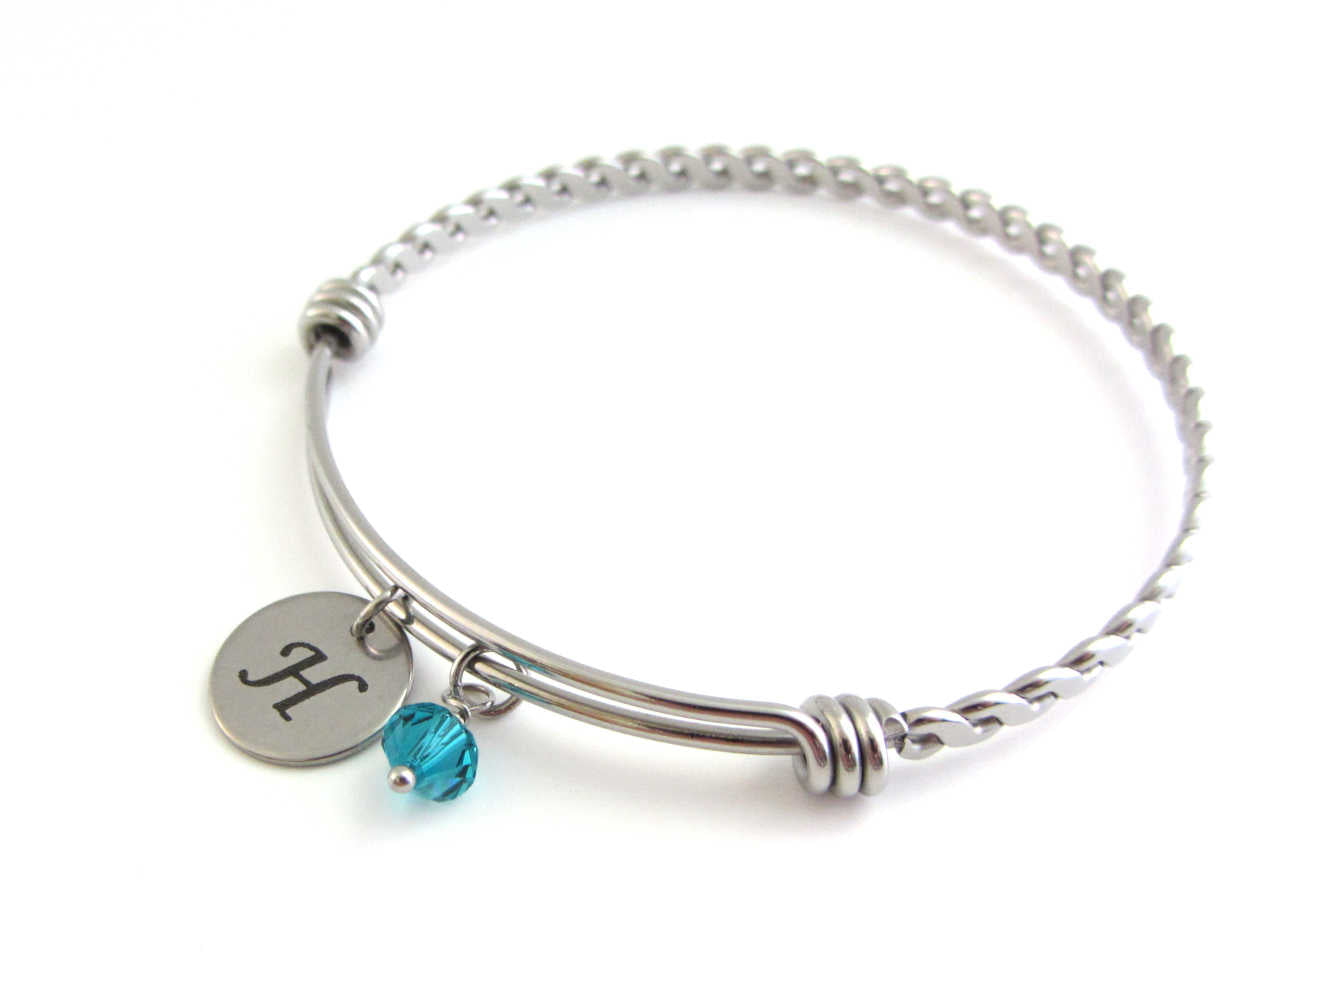 laser engraved capital initial letter disc charm and a blue green crystal charm on a bangle with braided twist pattern